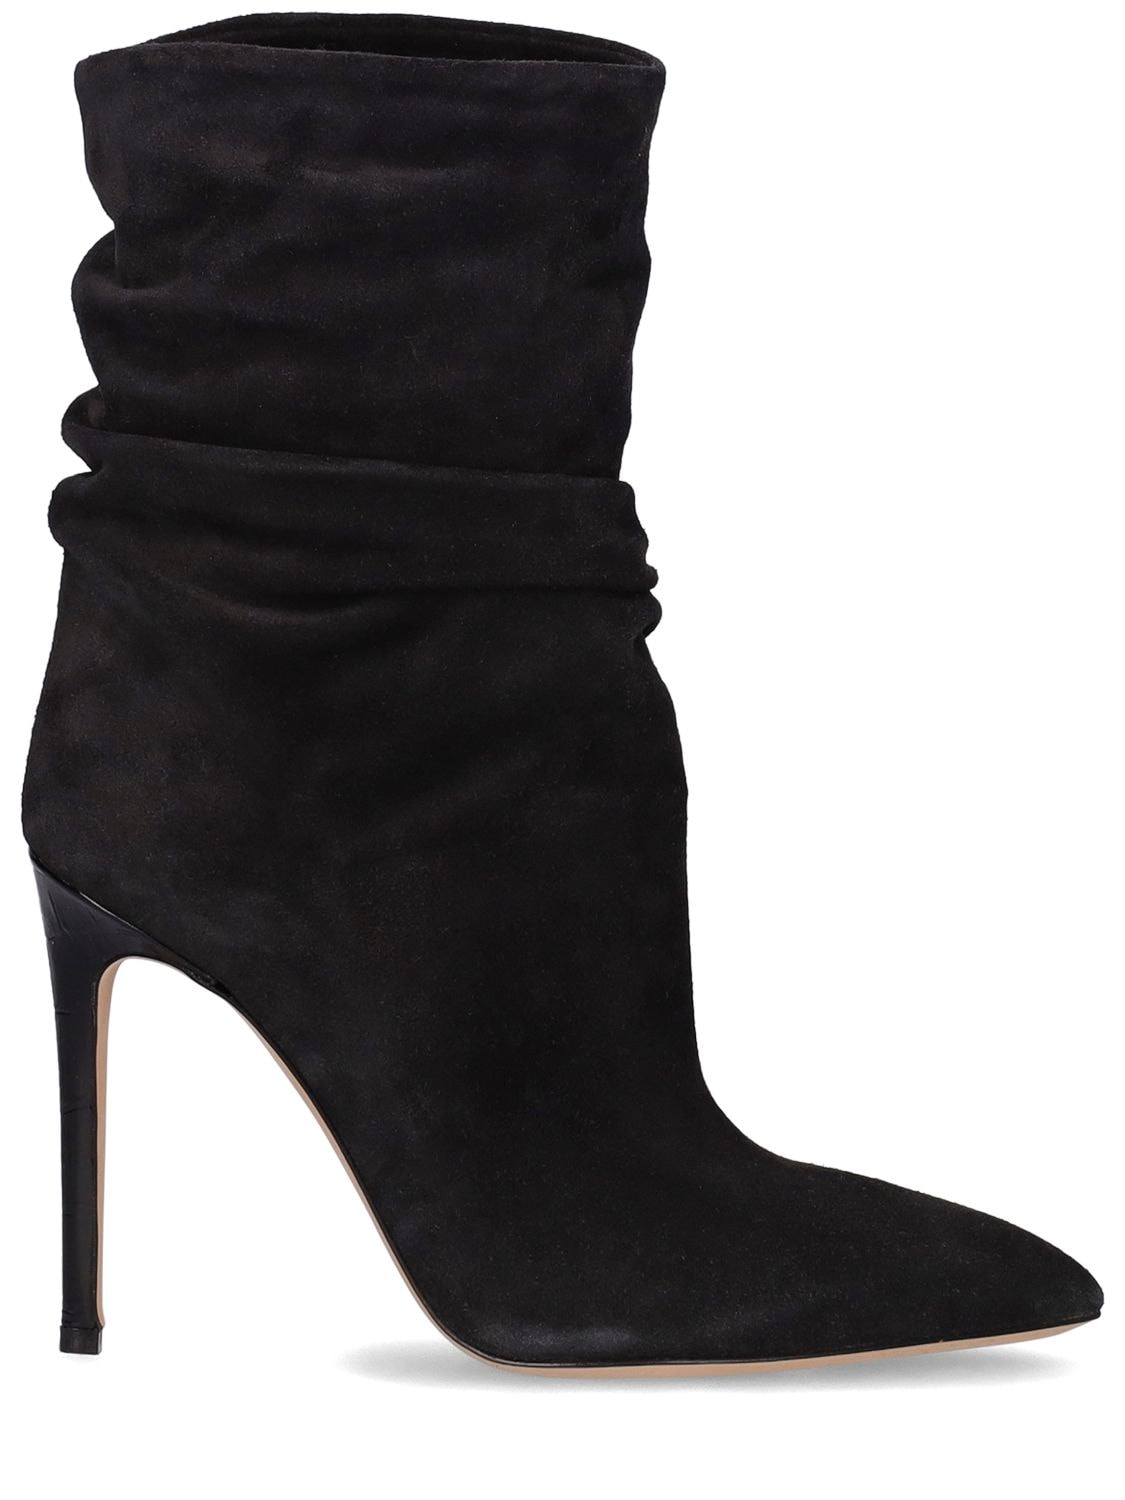 Paris Texas 105mm Slouchy Suede Ankle Boots In Black